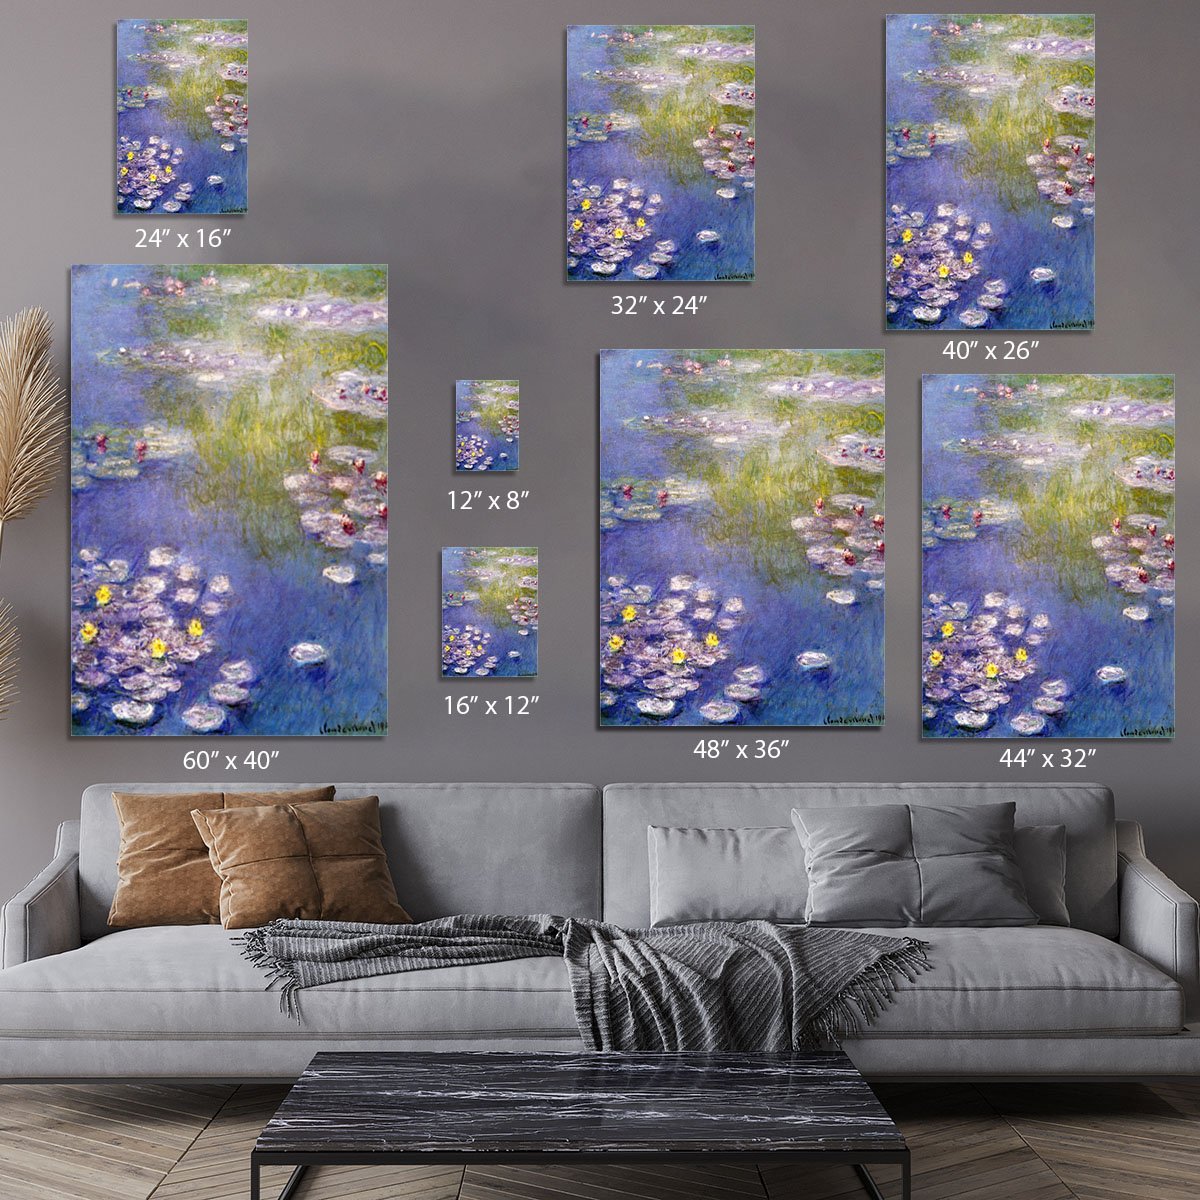 Nympheas at Giverny Canvas Print or Poster